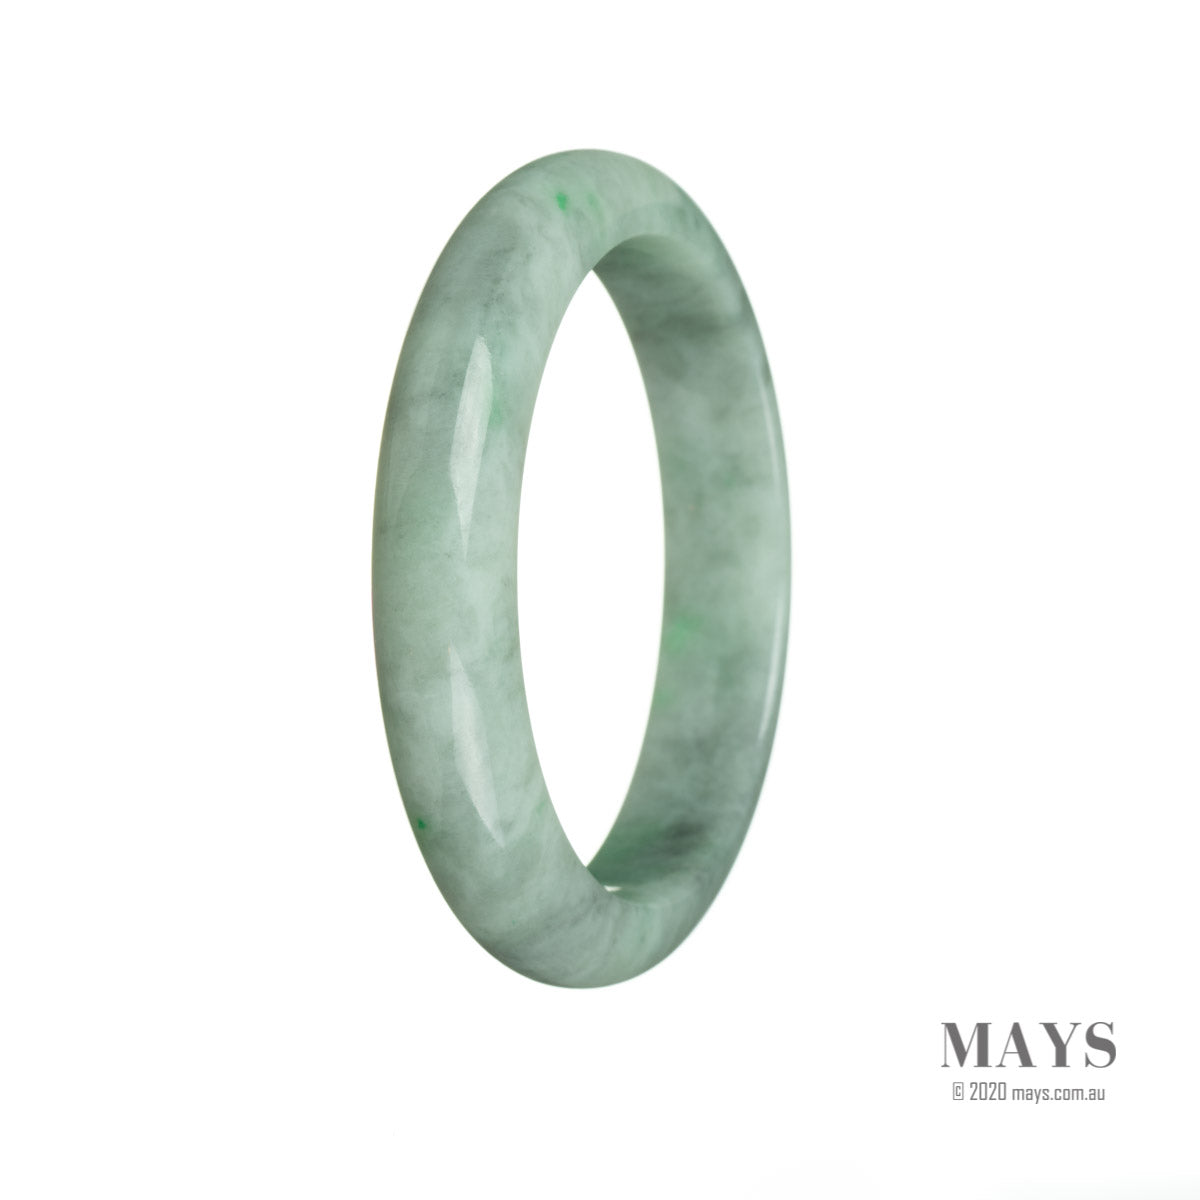 A close-up of a green bangle bracelet made of Burma Jade. The bracelet has a semi-round shape and measures 59mm in diameter. It is certified as Grade A Jade by MAYS GEMS.